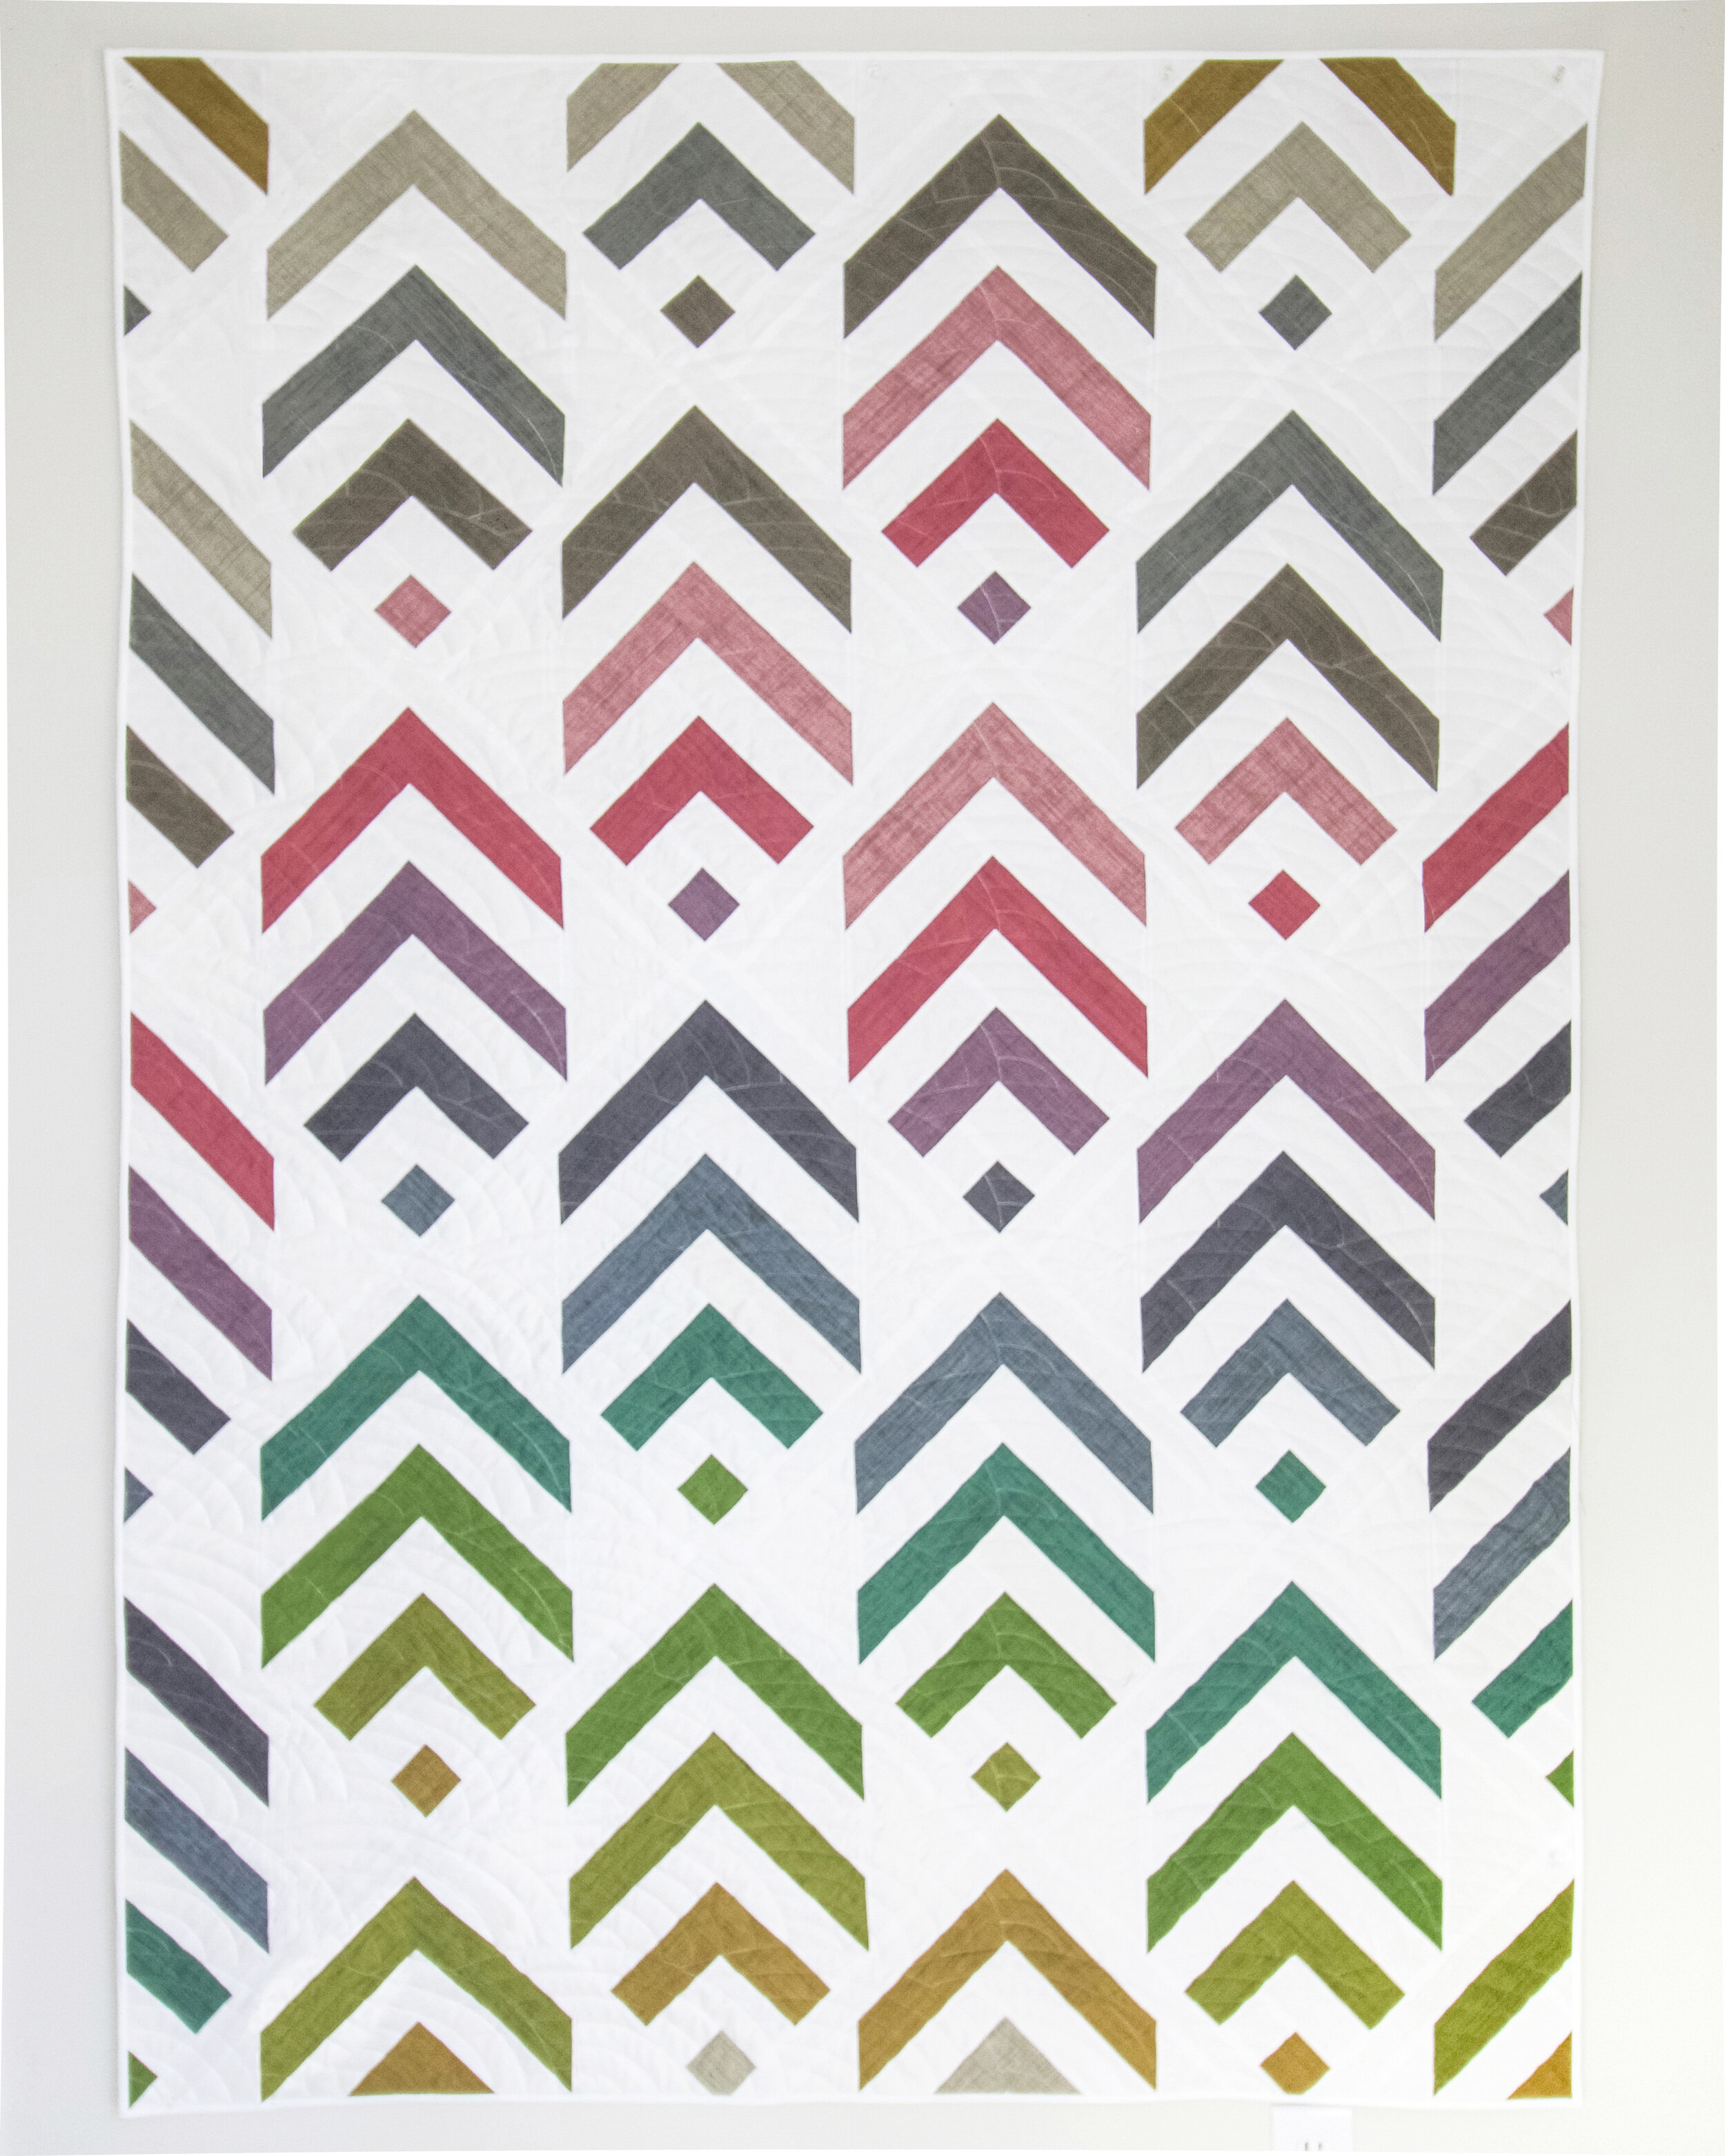 Treeline quilt pattern is now available! — Lee Heinrich Designs